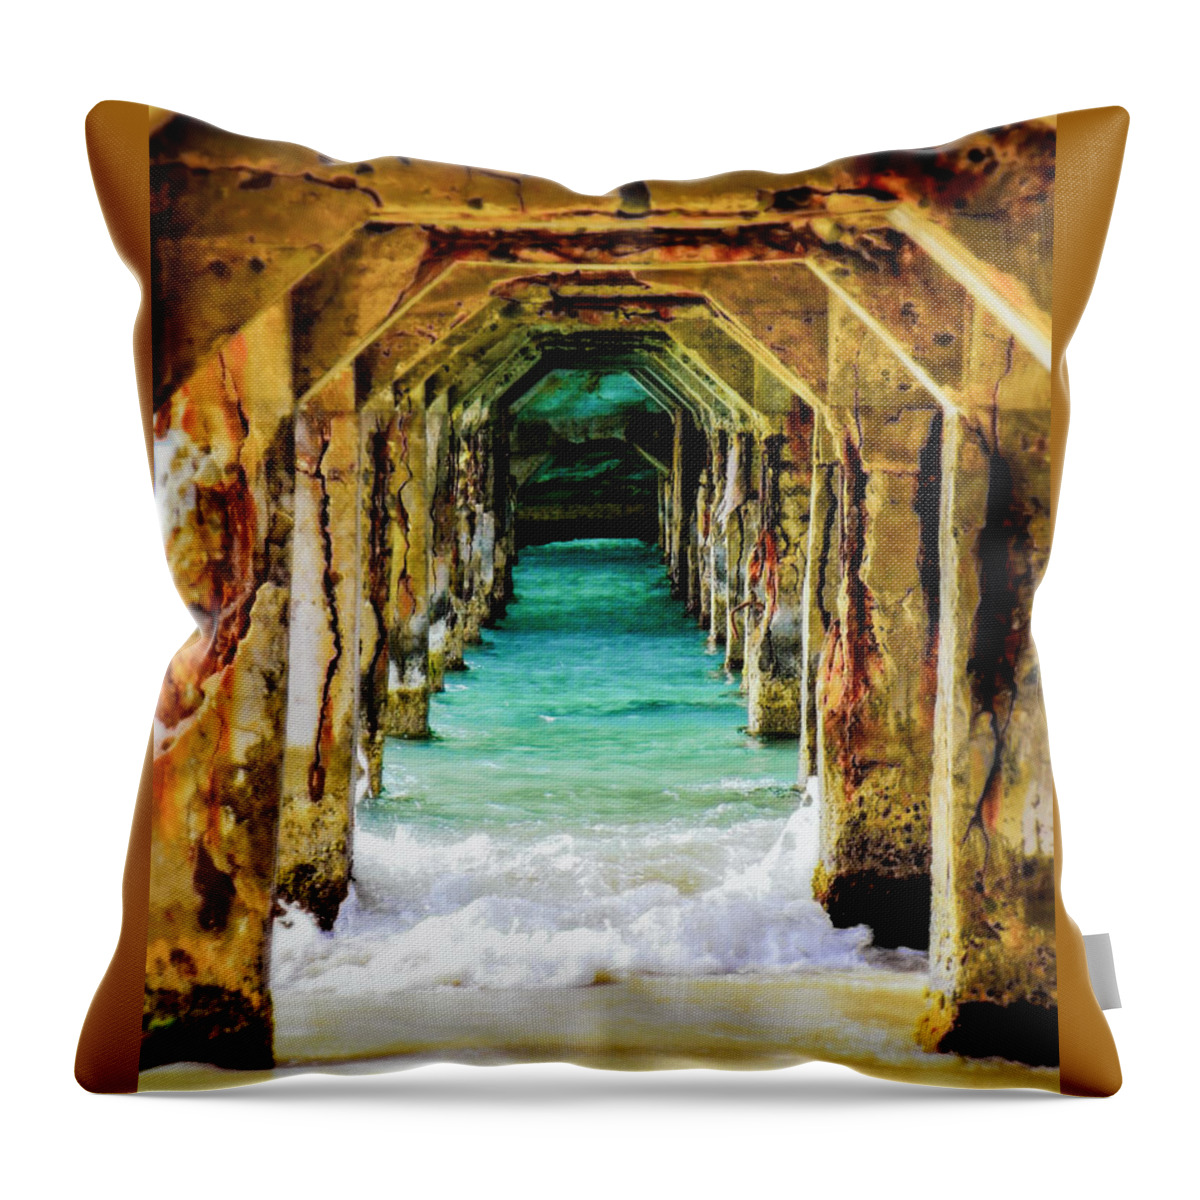 Waterscapes Throw Pillow featuring the photograph Tranquility Below by Karen Wiles